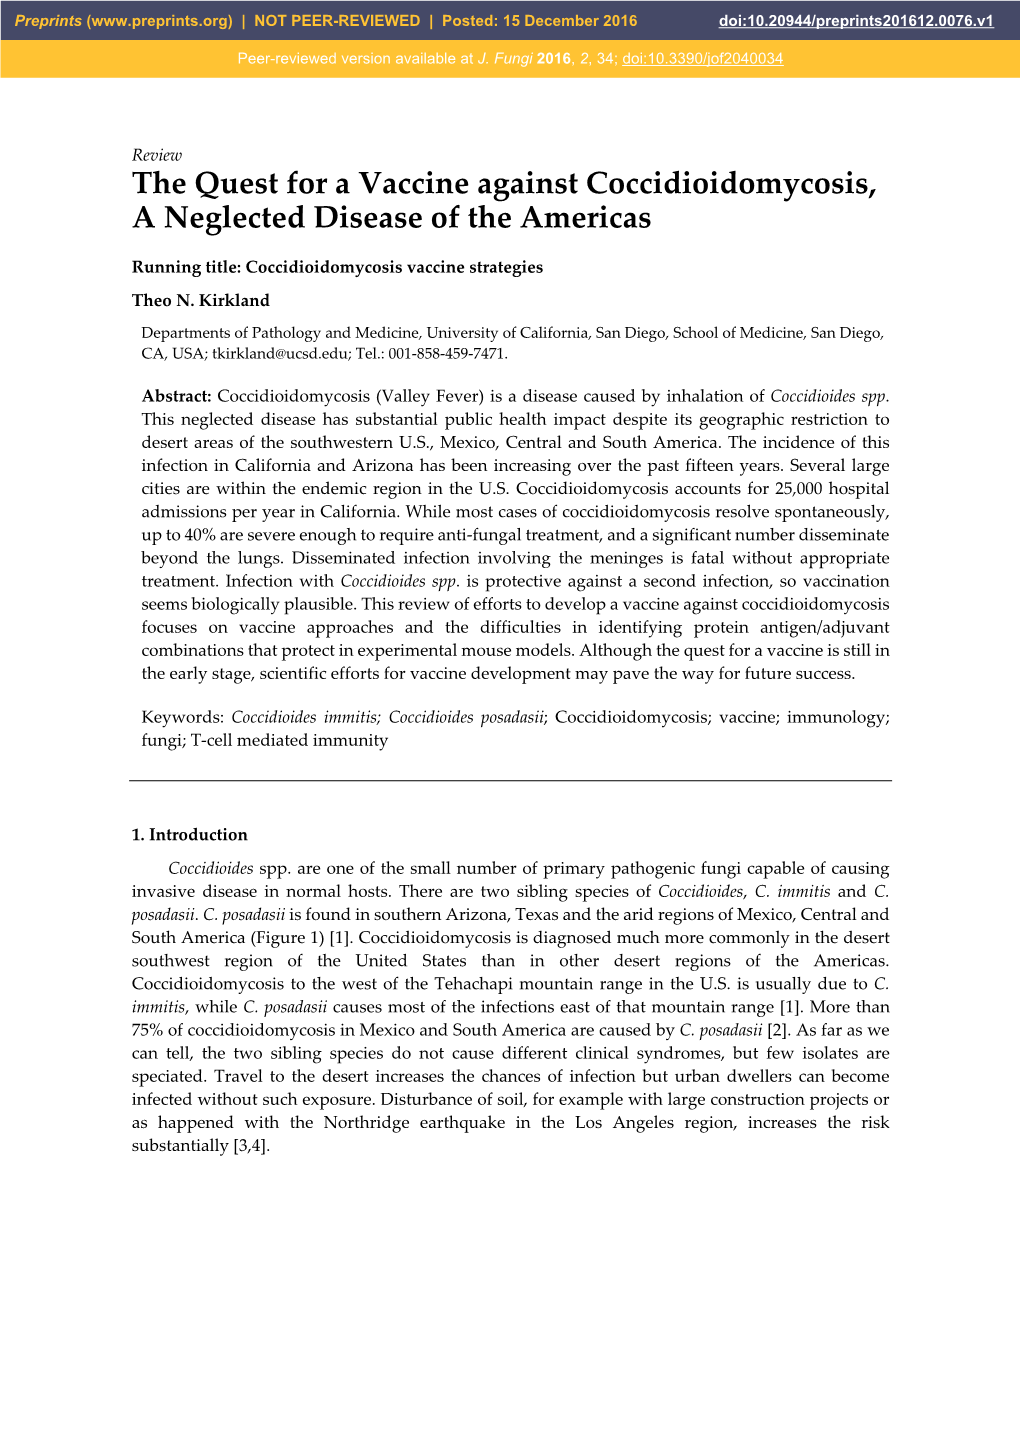 The Quest for a Vaccine Against Coccidioidomycosis, a Neglected Disease of the Americas